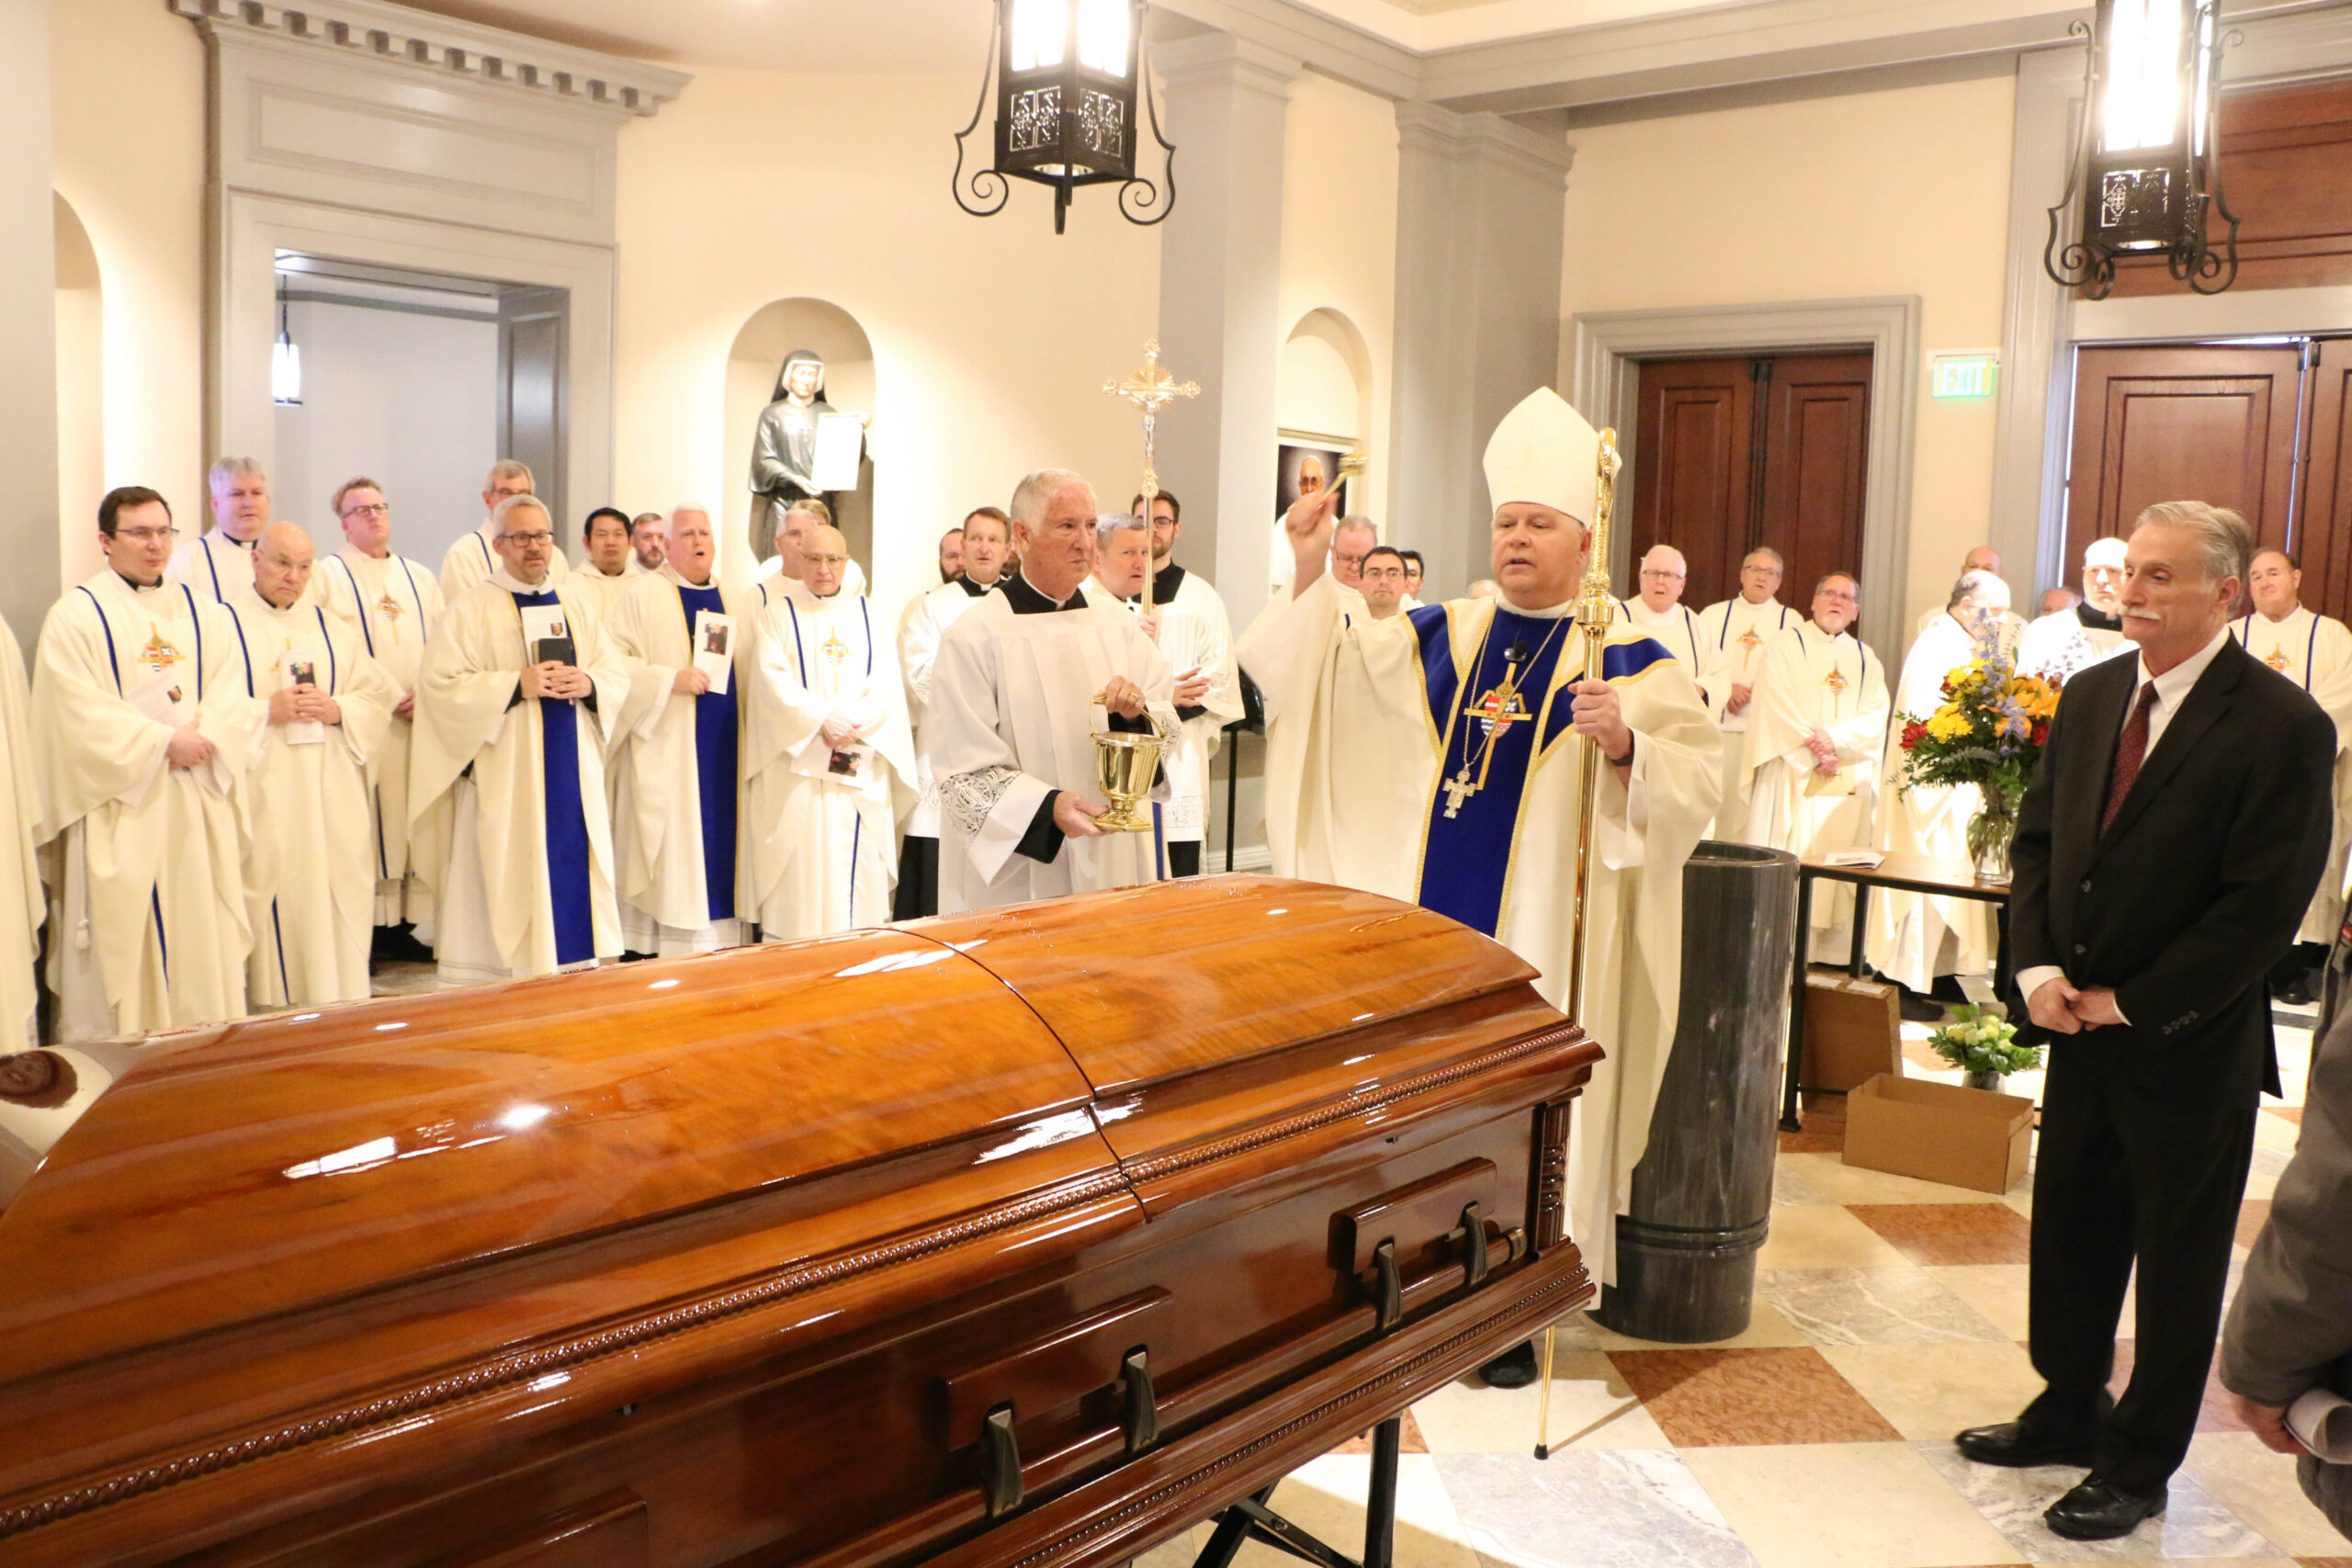 Funeral Mass for Monsignor Bill Gahagan held at cathedral